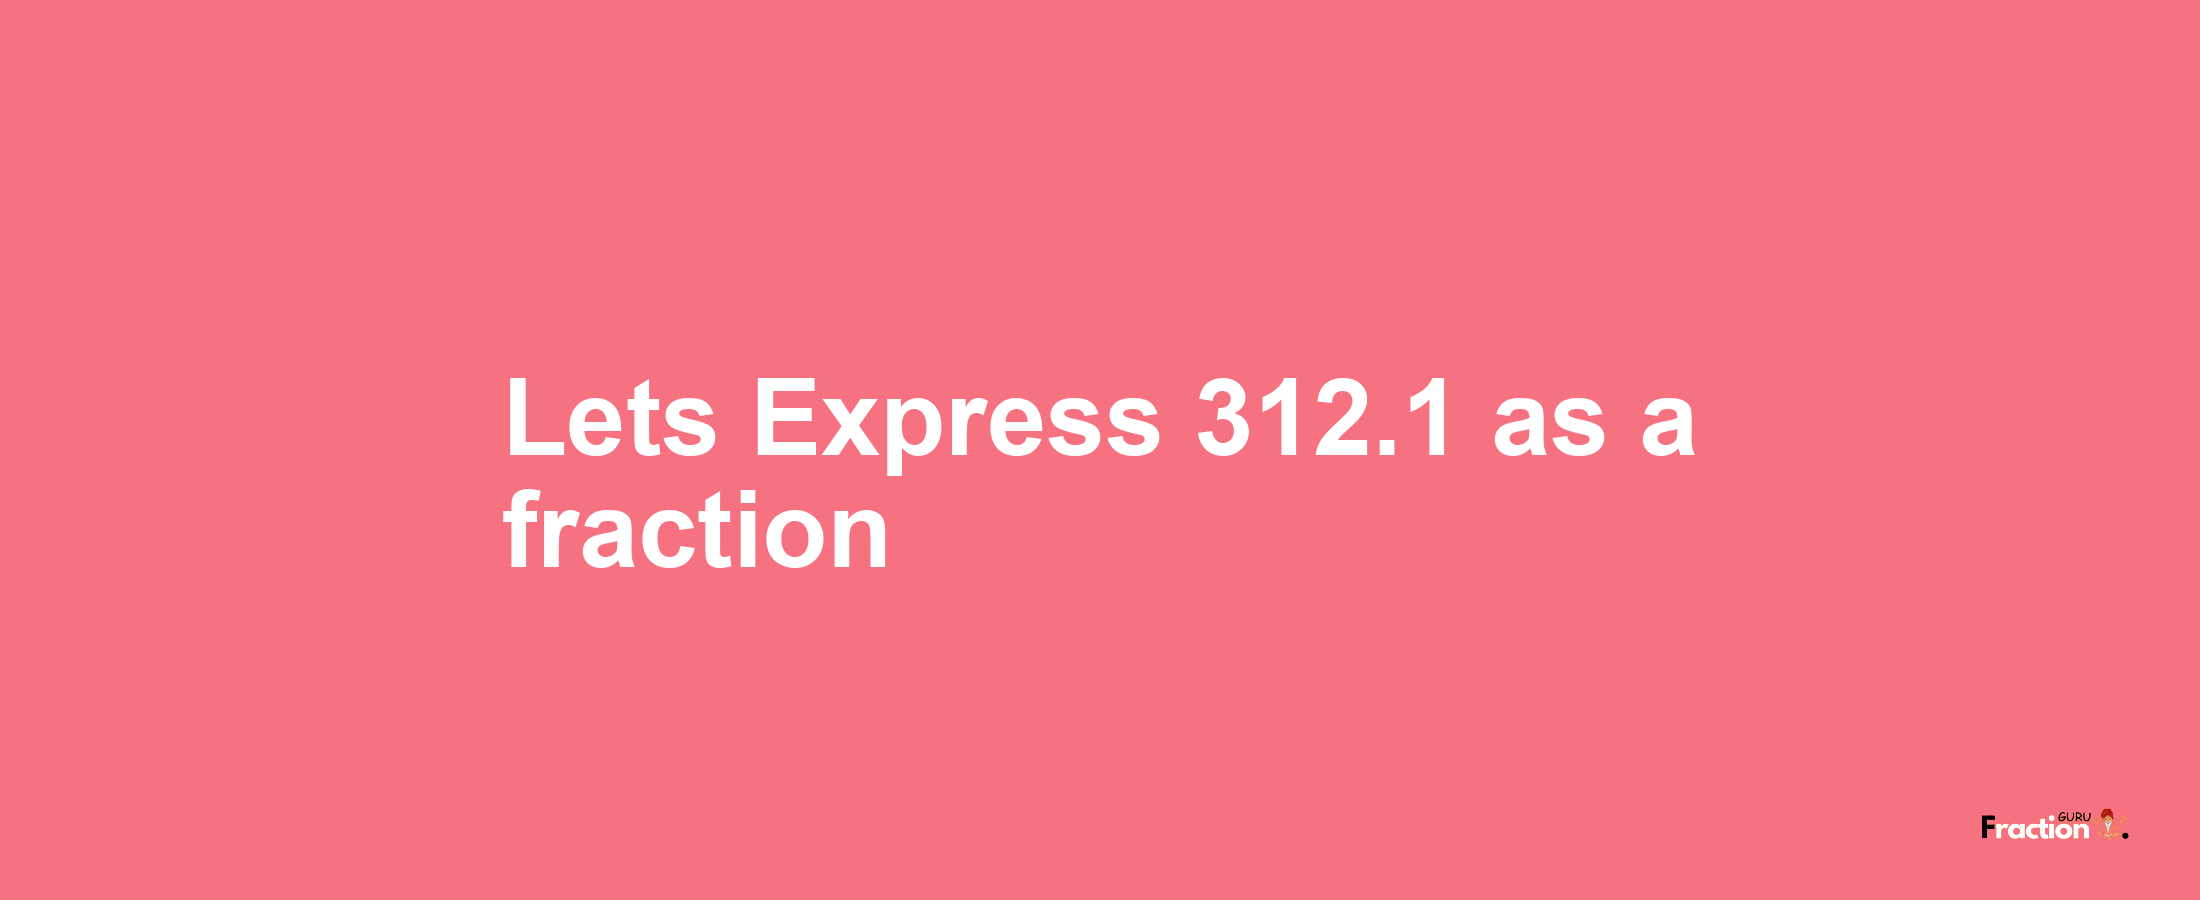 Lets Express 312.1 as afraction